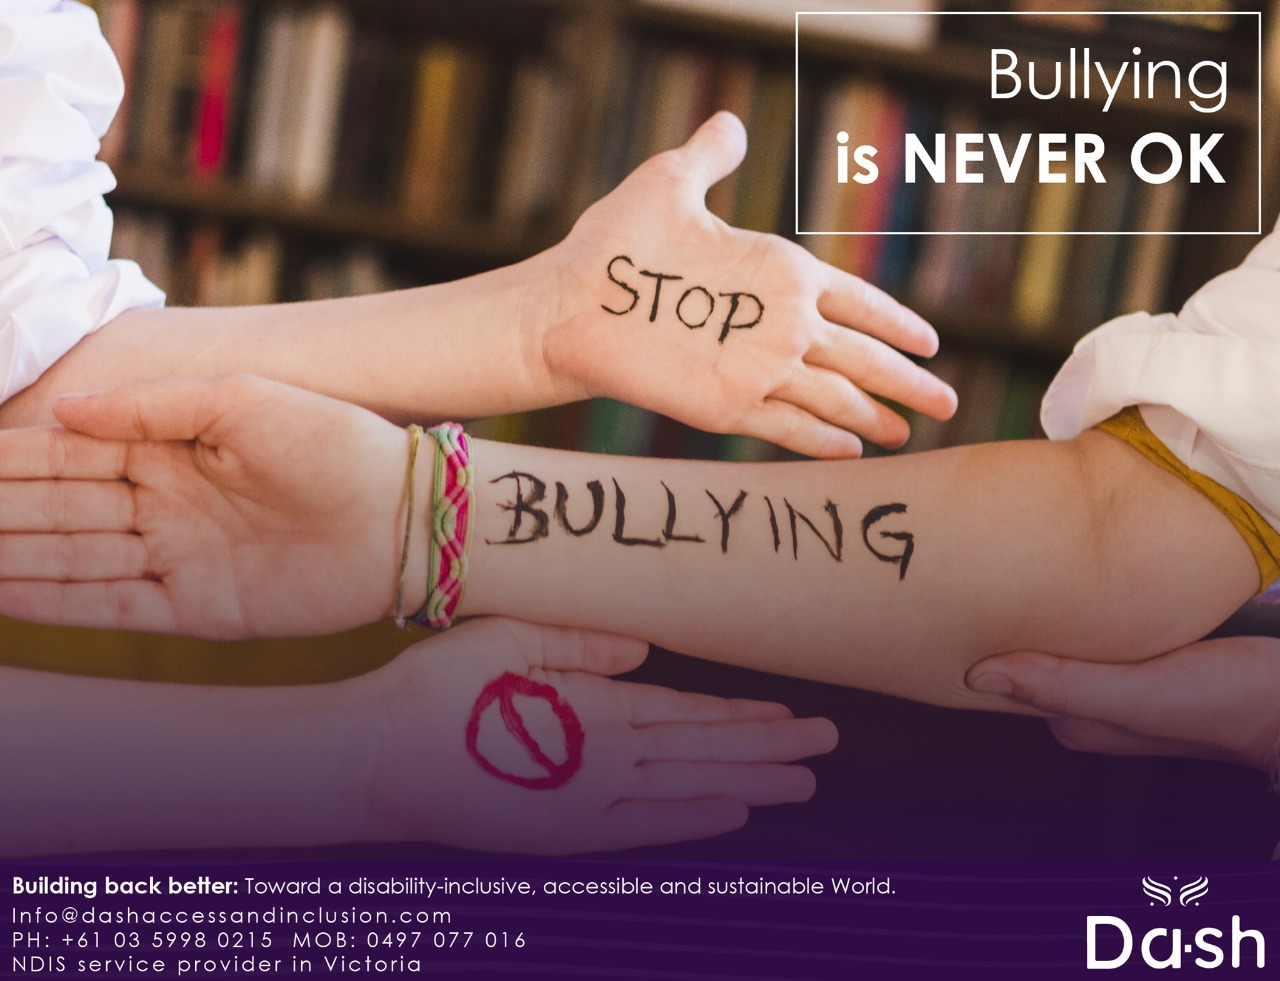 National Day of Action against Bullying March 19💜